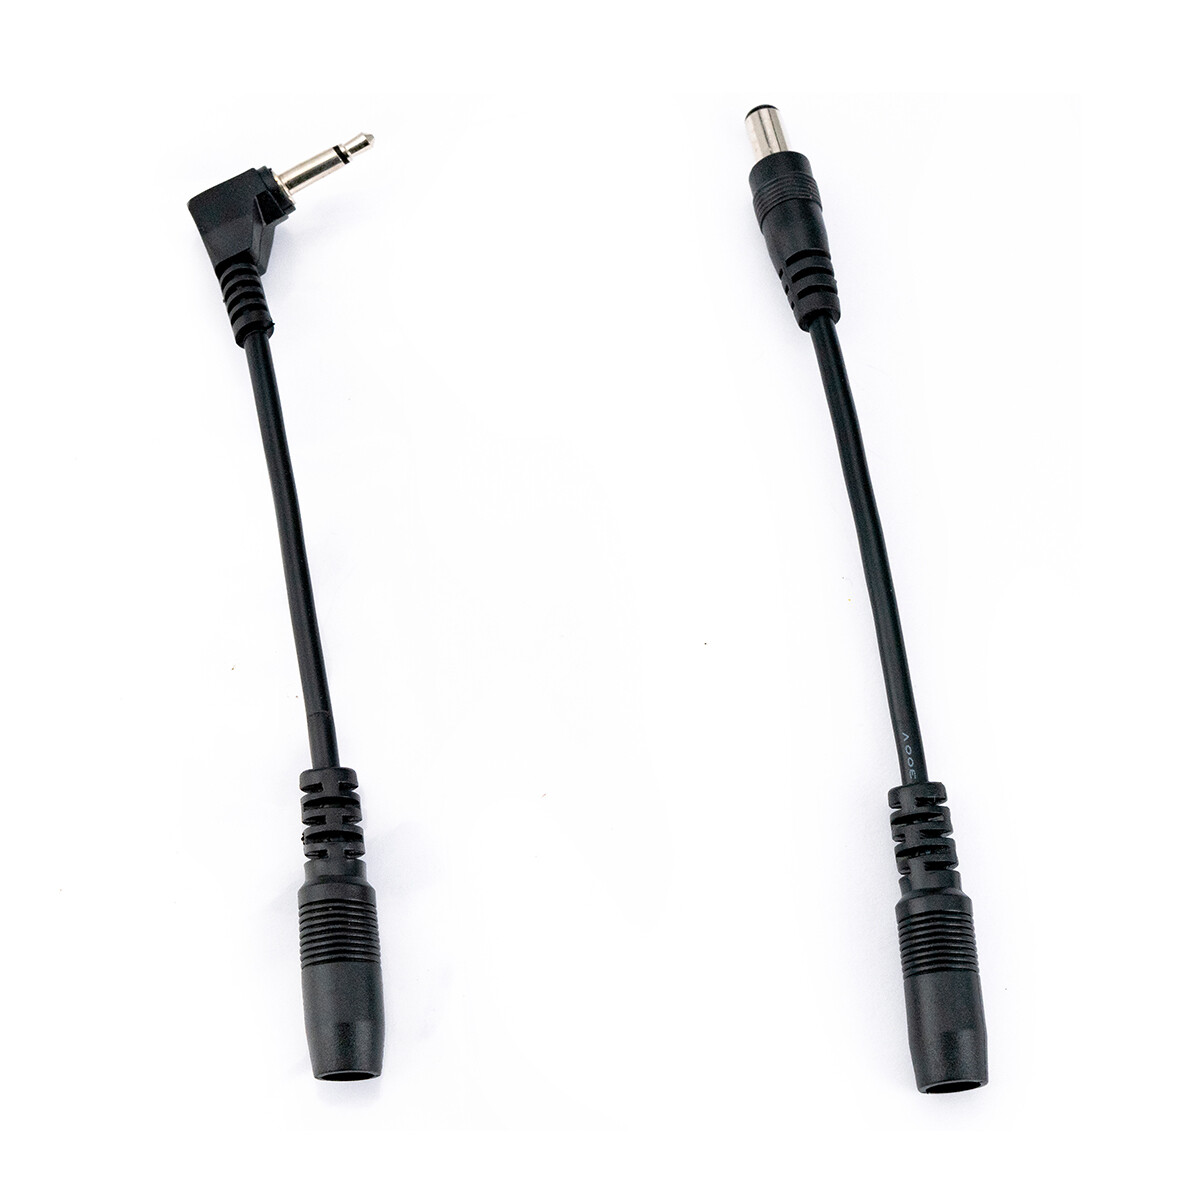 Reverse Polarity Converter Cables Straight & Elbow Set for Guitar Effect Pedals